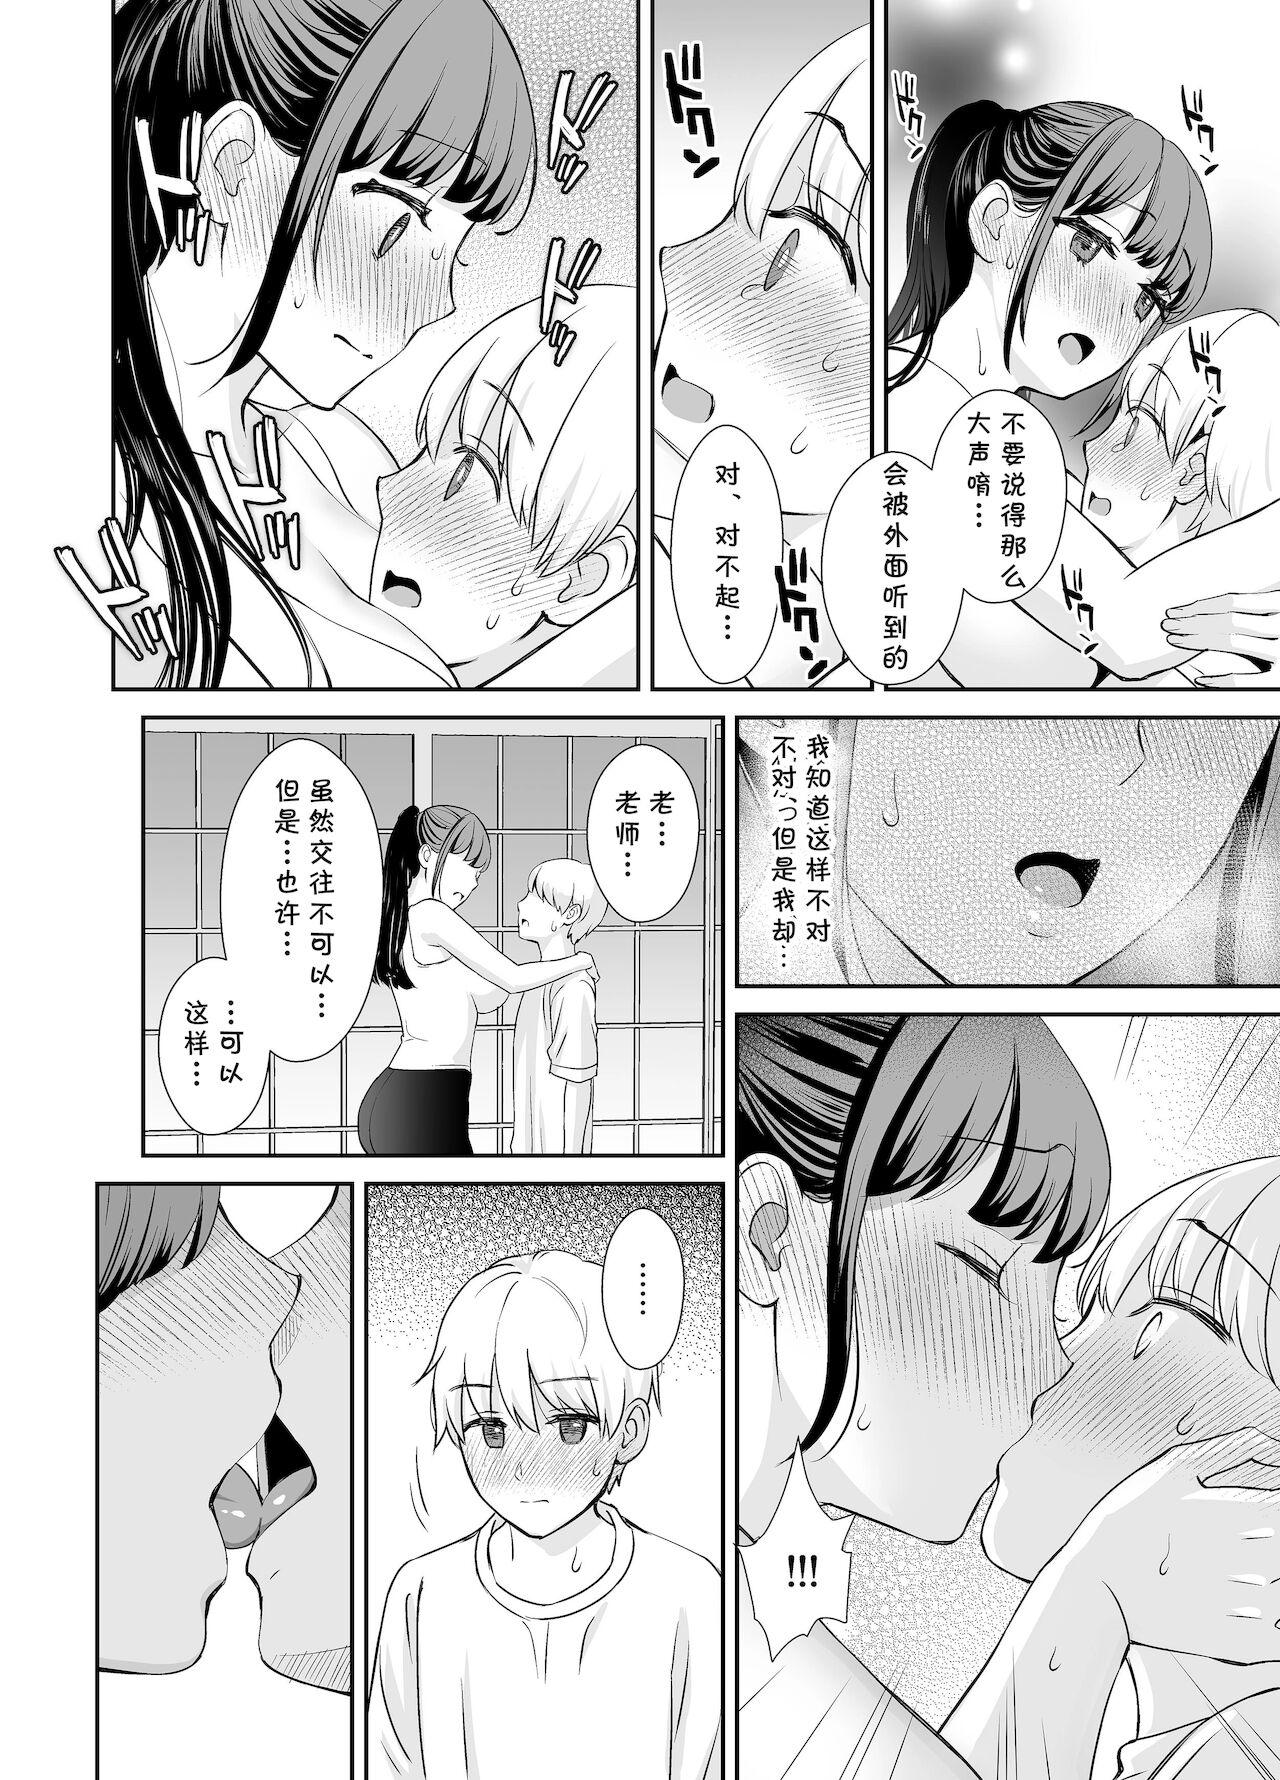 Spread 彼氏持ちの先生と生徒 Unshaved - Page 11